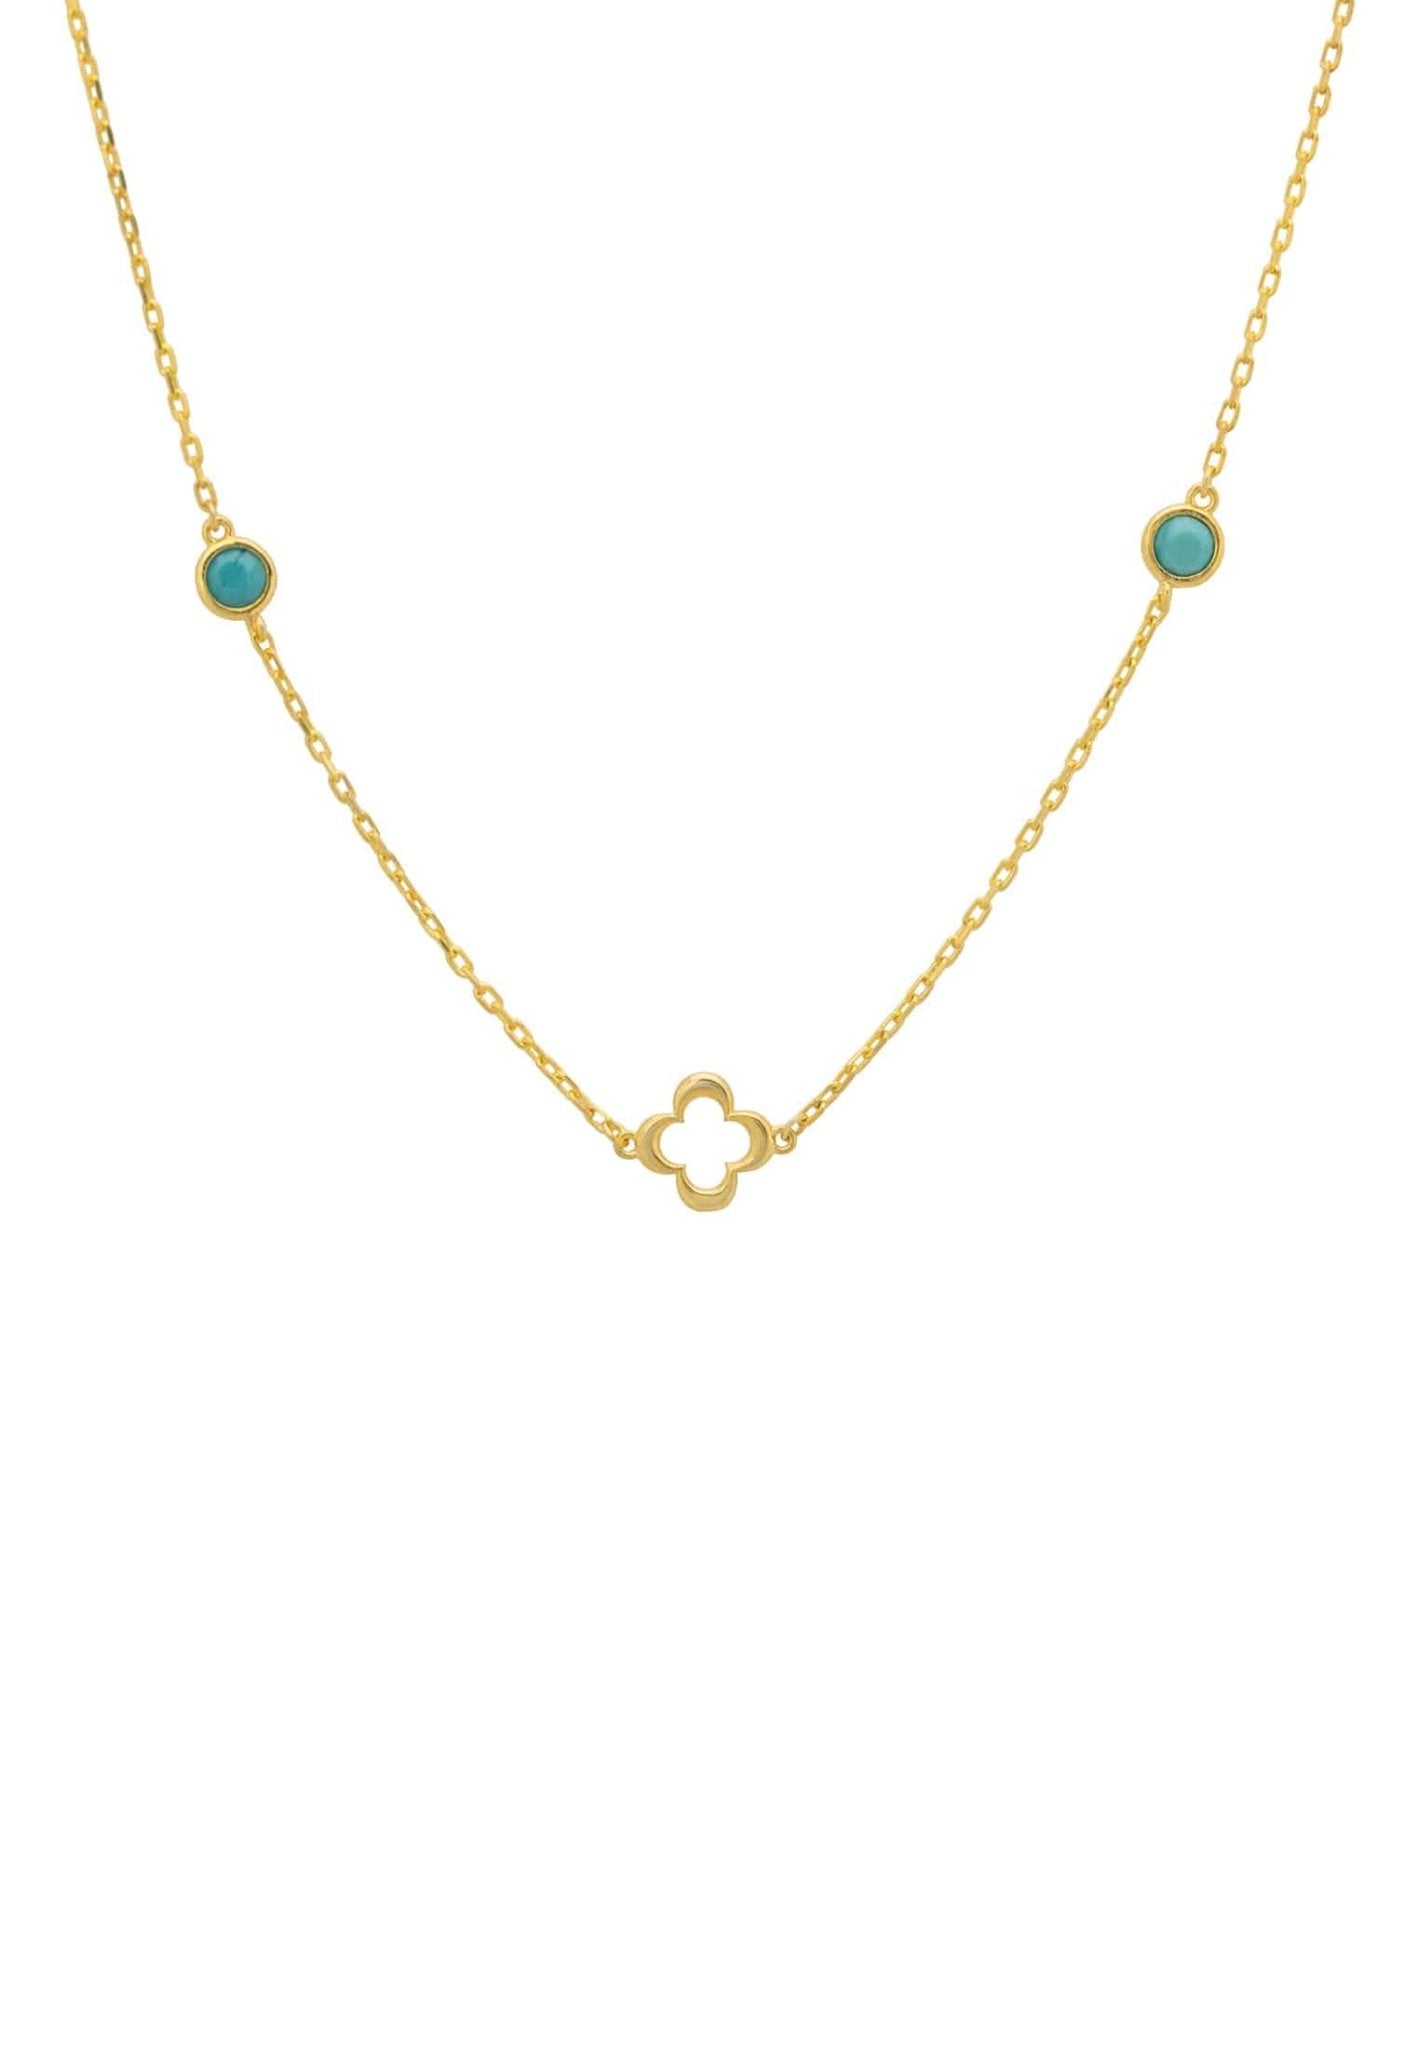 Open Clover Long Gemstone Necklace Gold Turquoise - LATELITA Necklaces